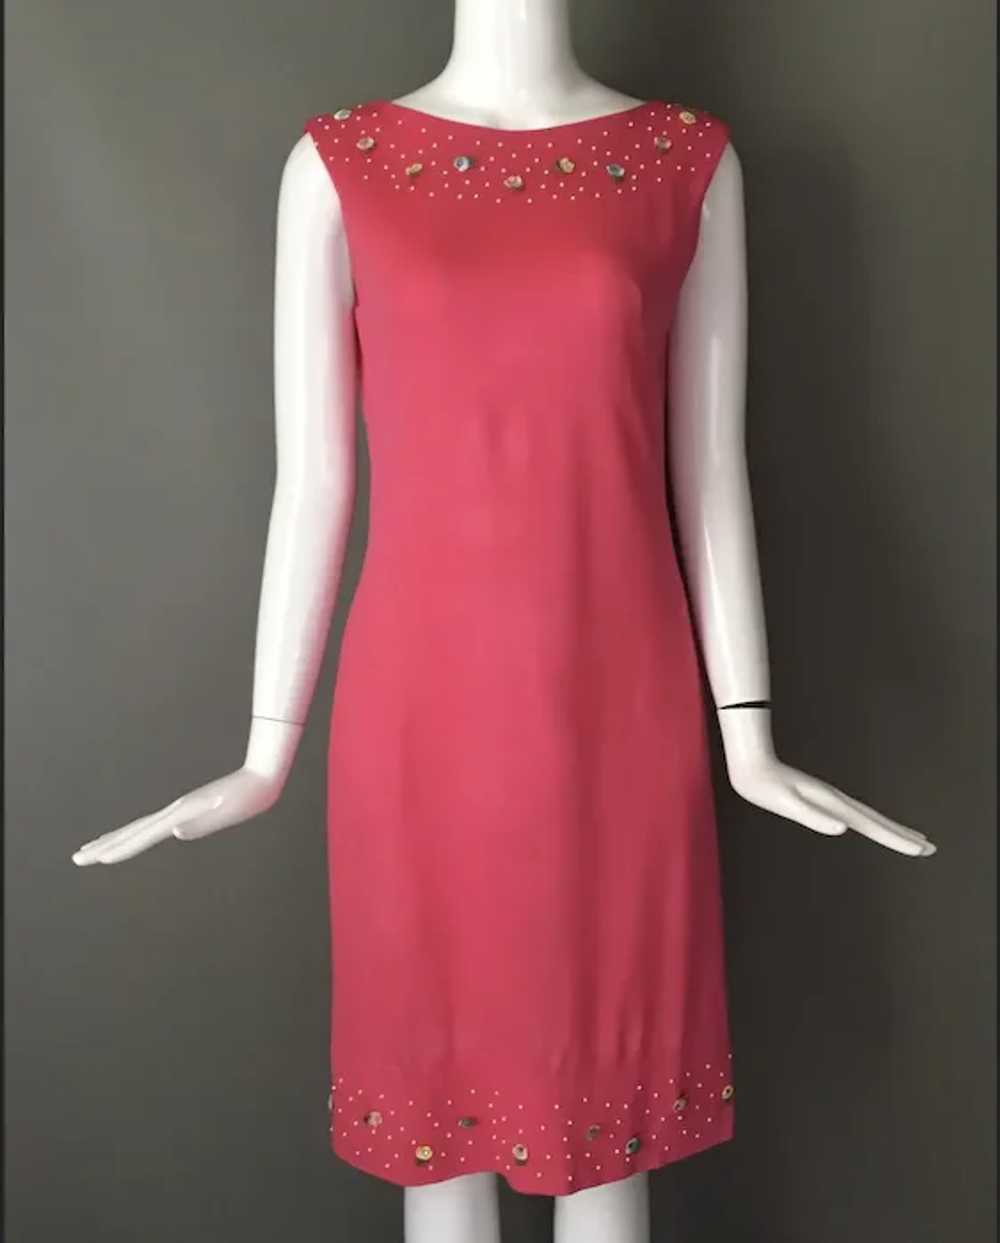 Vintage 60s Poppy Pink Shift Dress M Exc Condition - image 2